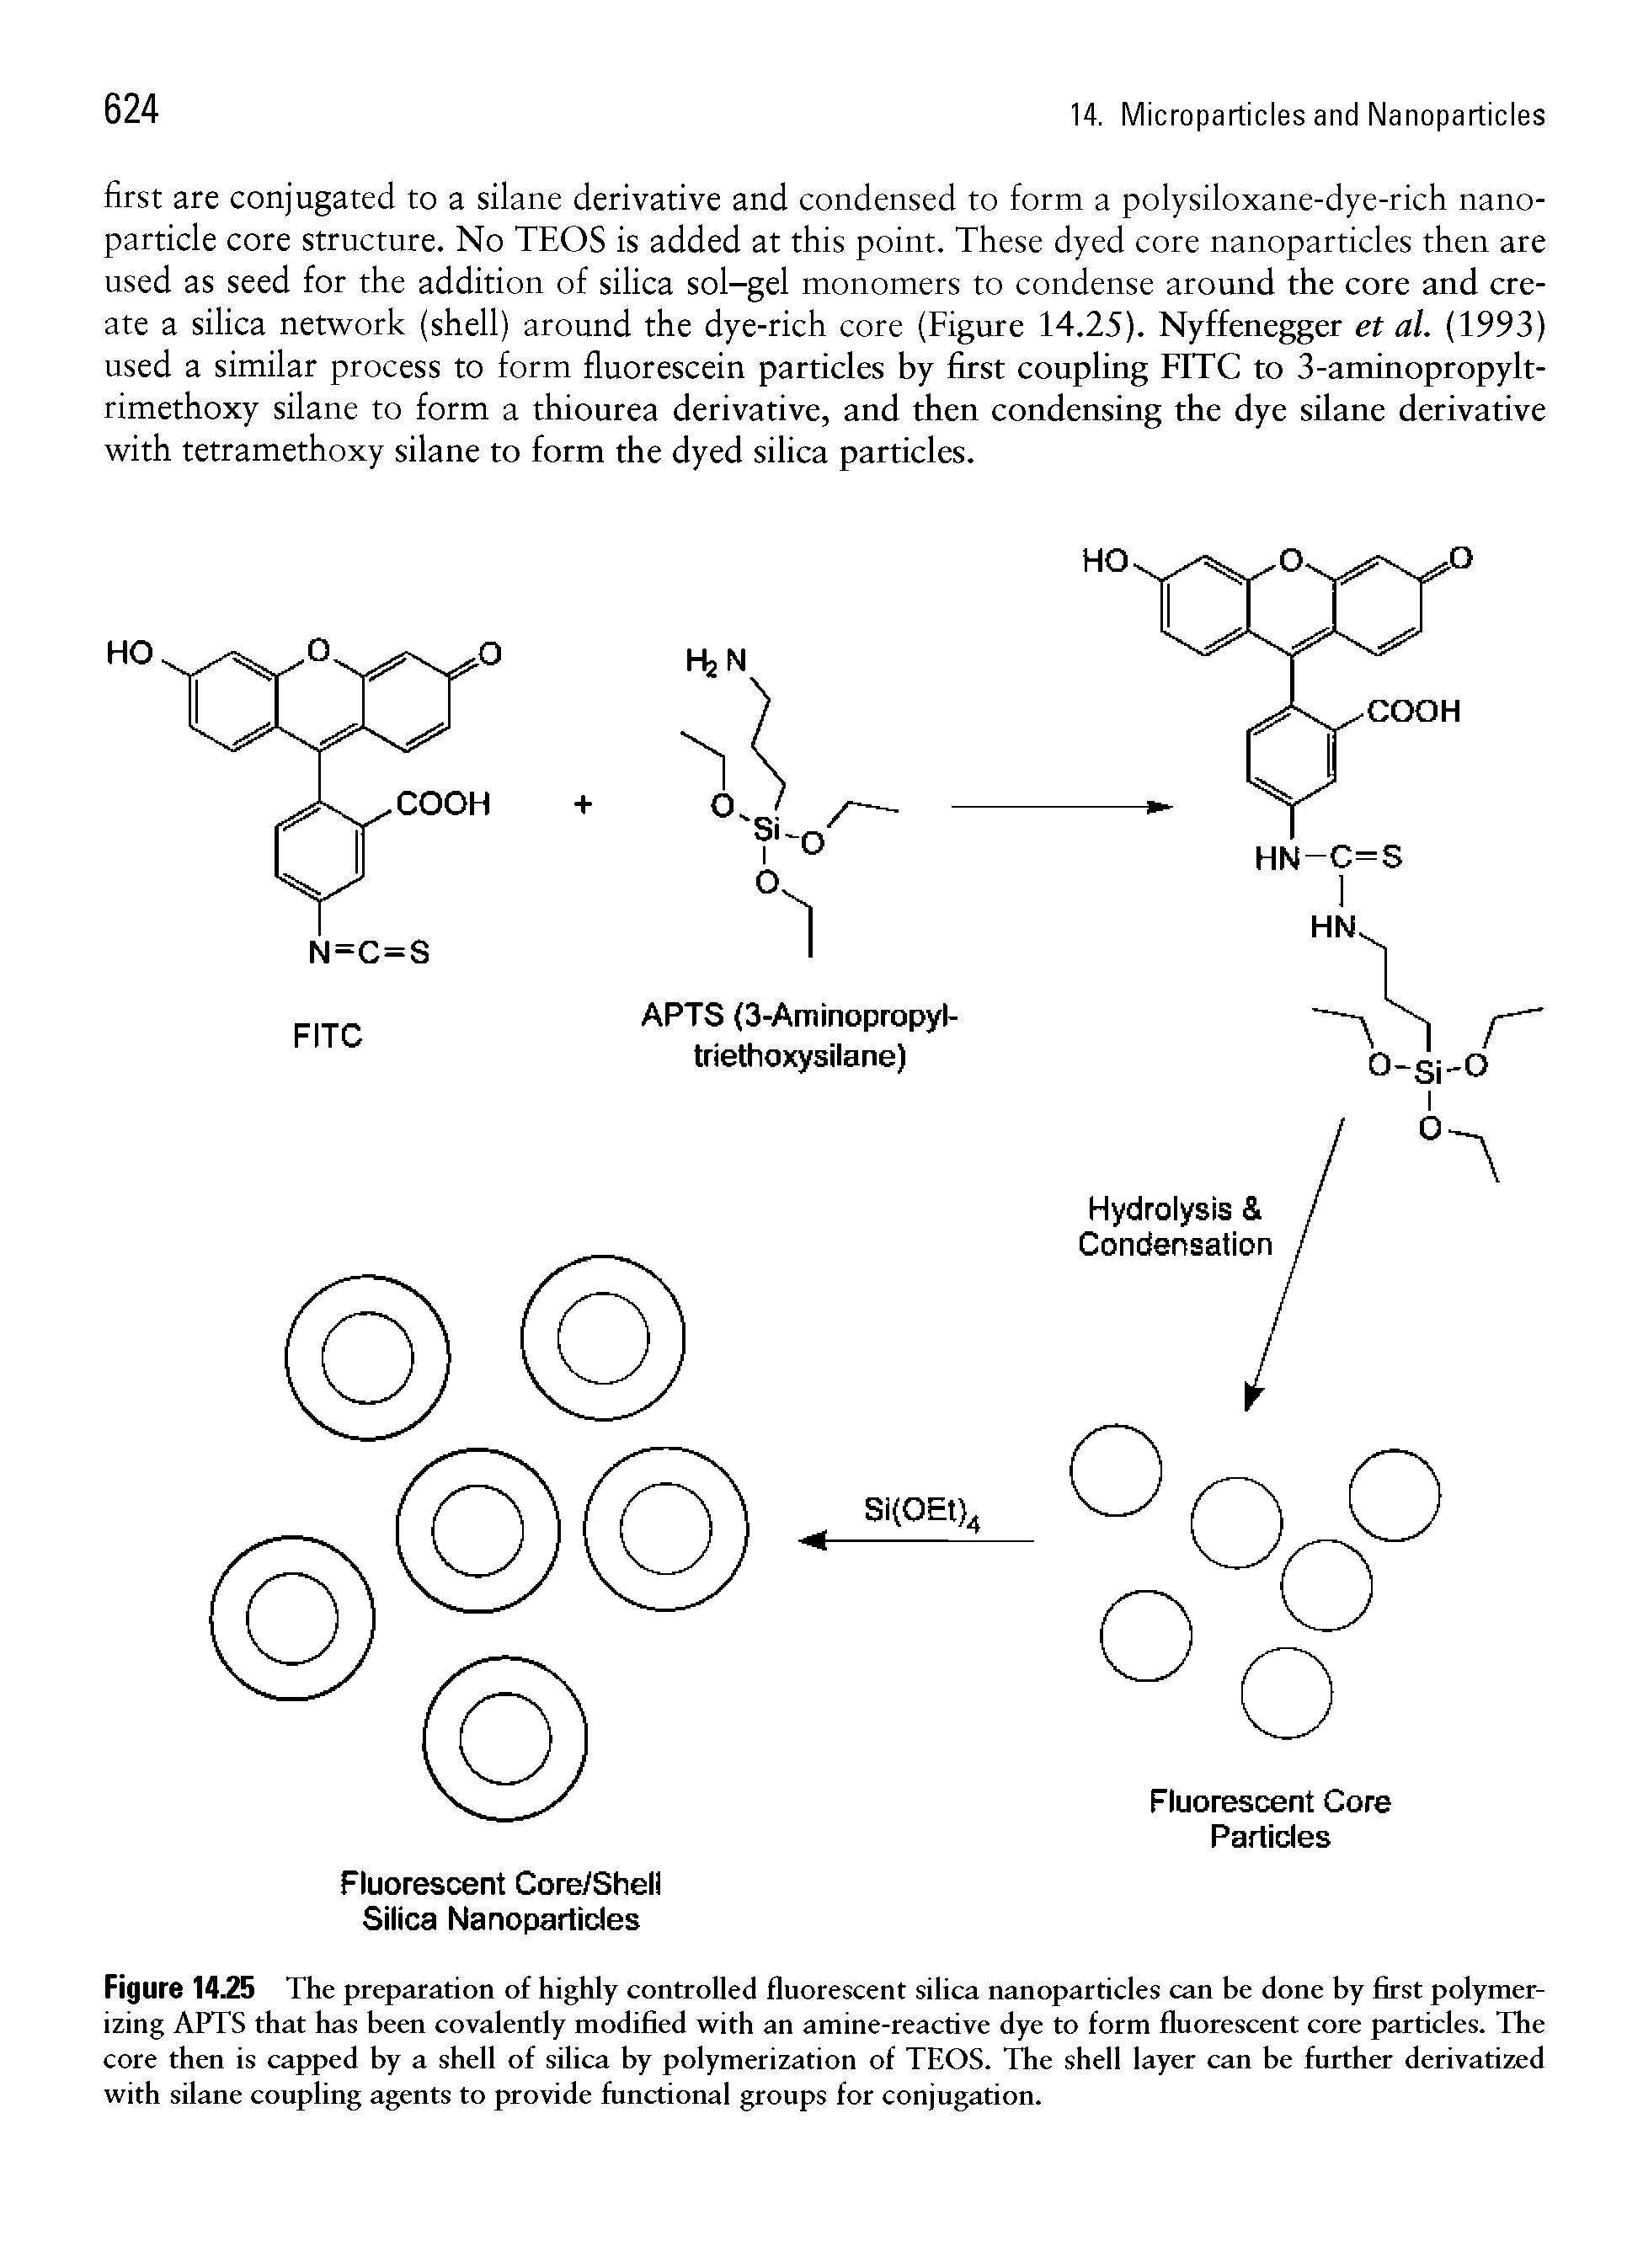 Figure 14.25 The preparation of highly controlled fluorescent silica nanoparticles can be done by first polymerizing APTS that has been covalently modified with an amine-reactive dye to form fluorescent core particles. The core then is capped by a shell of silica by polymerization of TEOS. The shell layer can be further derivatized with silane coupling agents to provide functional groups for conjugation.